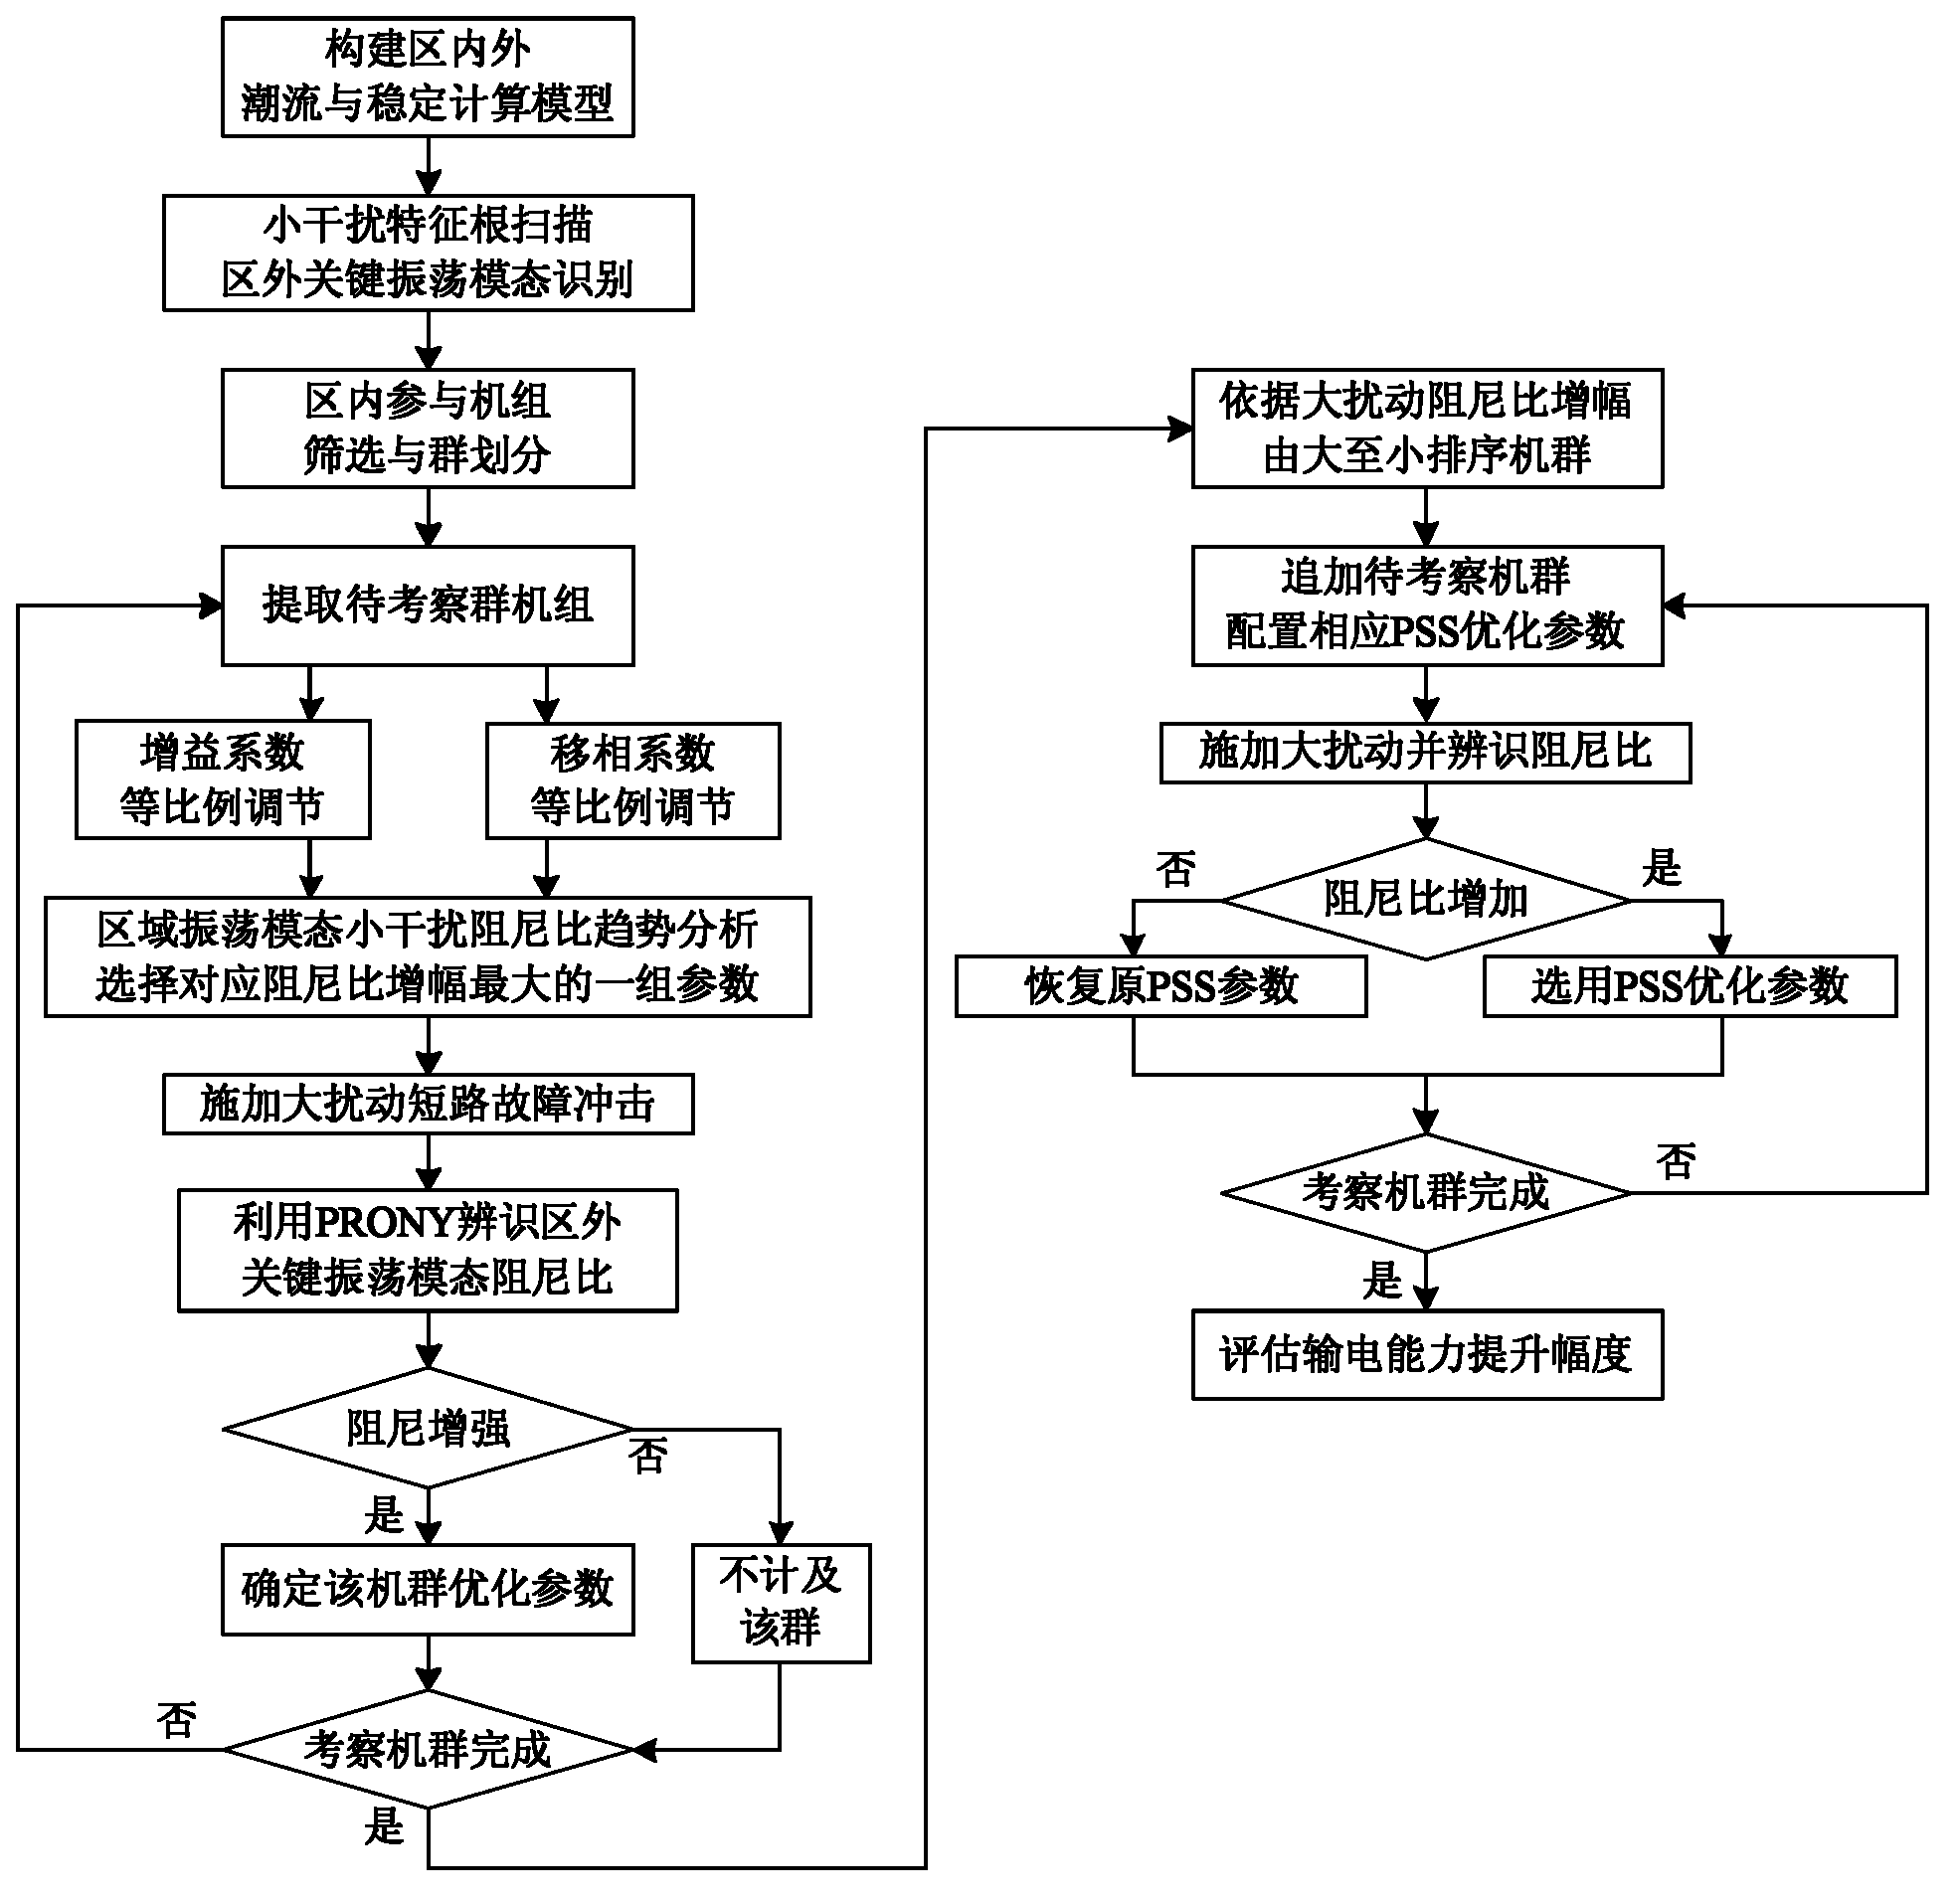 Multiple-cluster PSS (packet switching service) coordination and optimization method for mitigating inside-and-outside correlative coupling